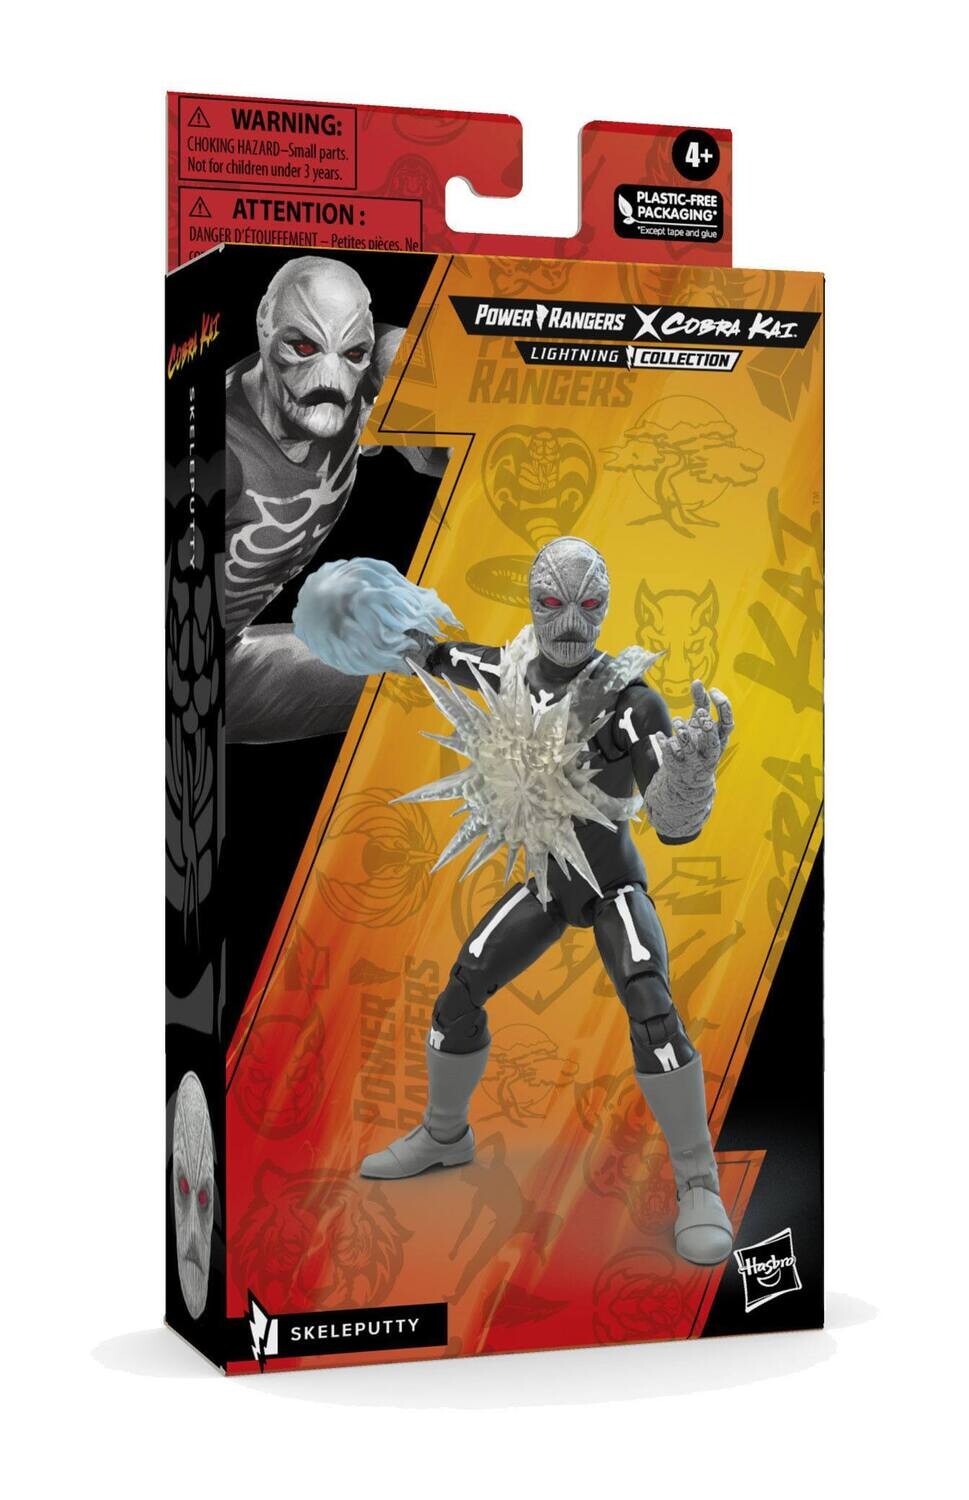 PREORDER: Power Rangers x Cobra Kai Ligtning Collection Action Figure Skeleputty 15 cm